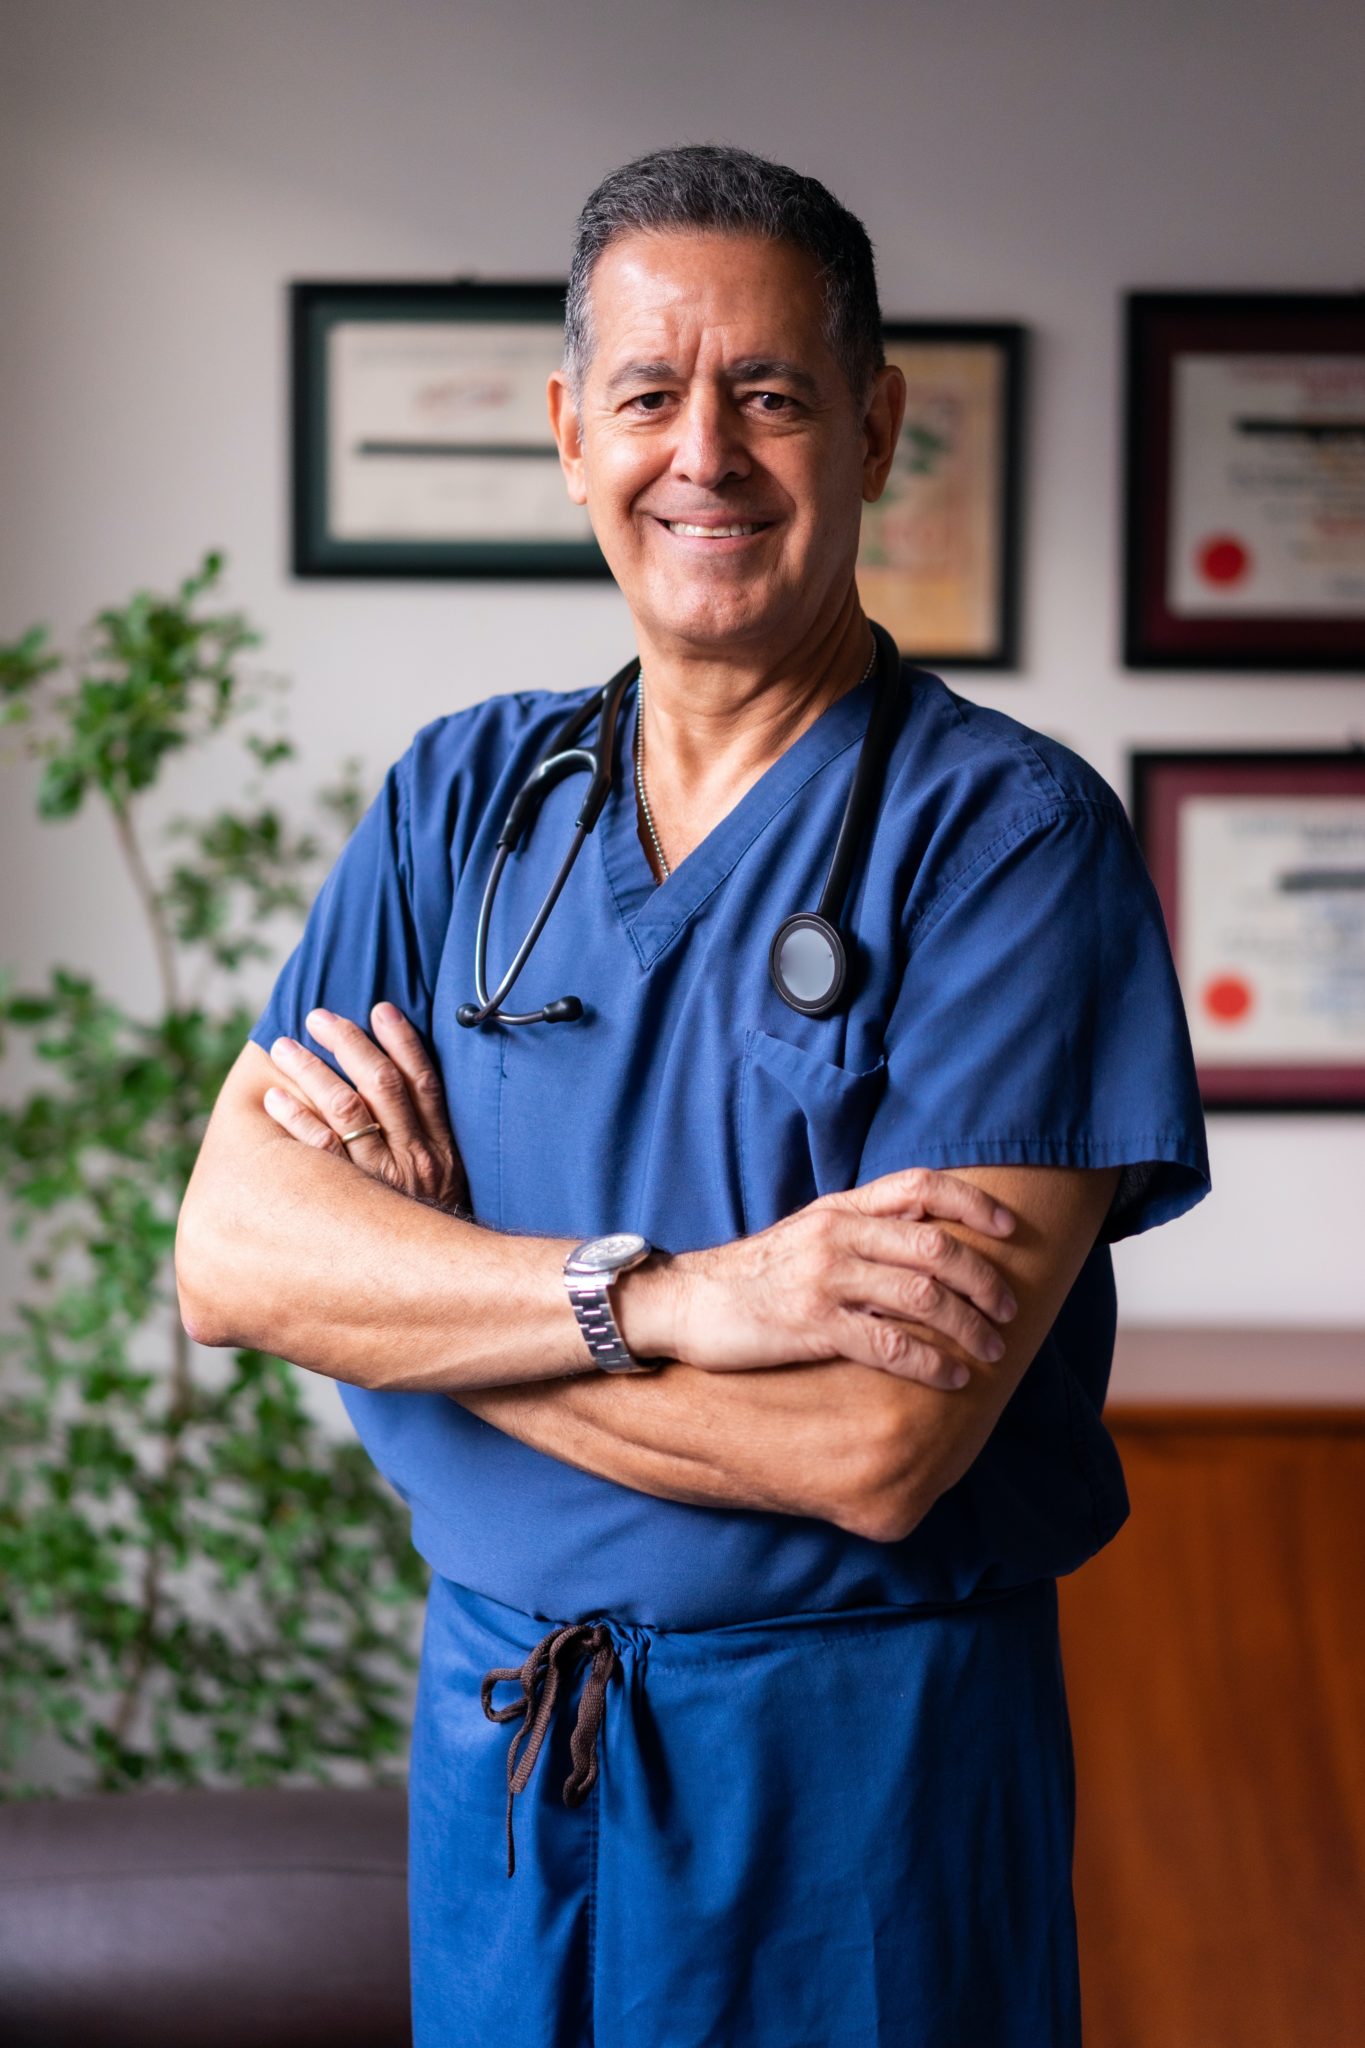 A Latine doctor stands with is arms crossed in blue scrubs smiling to the camera